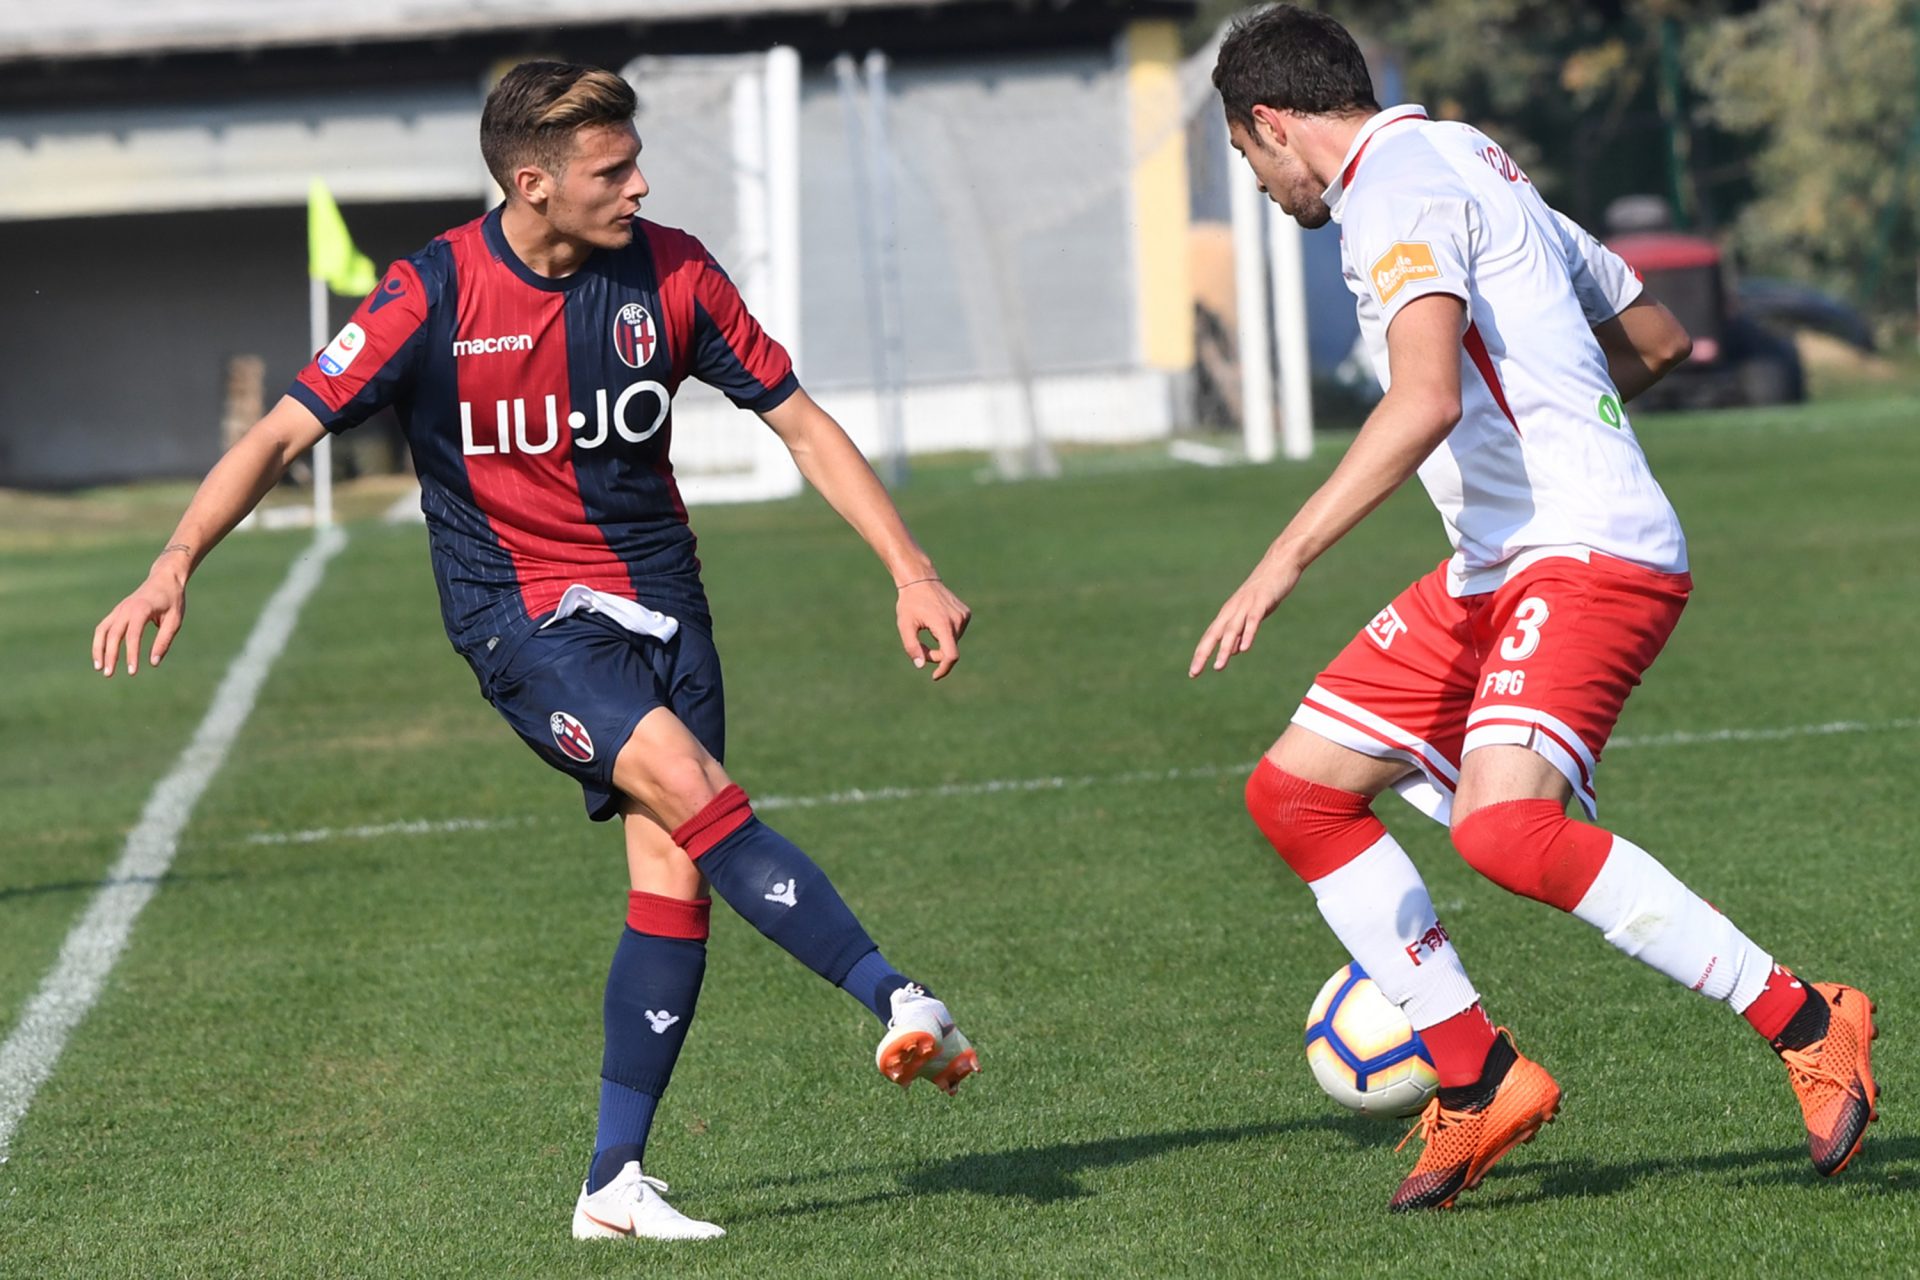 The gallery from today’s friendly match | BolognaFC